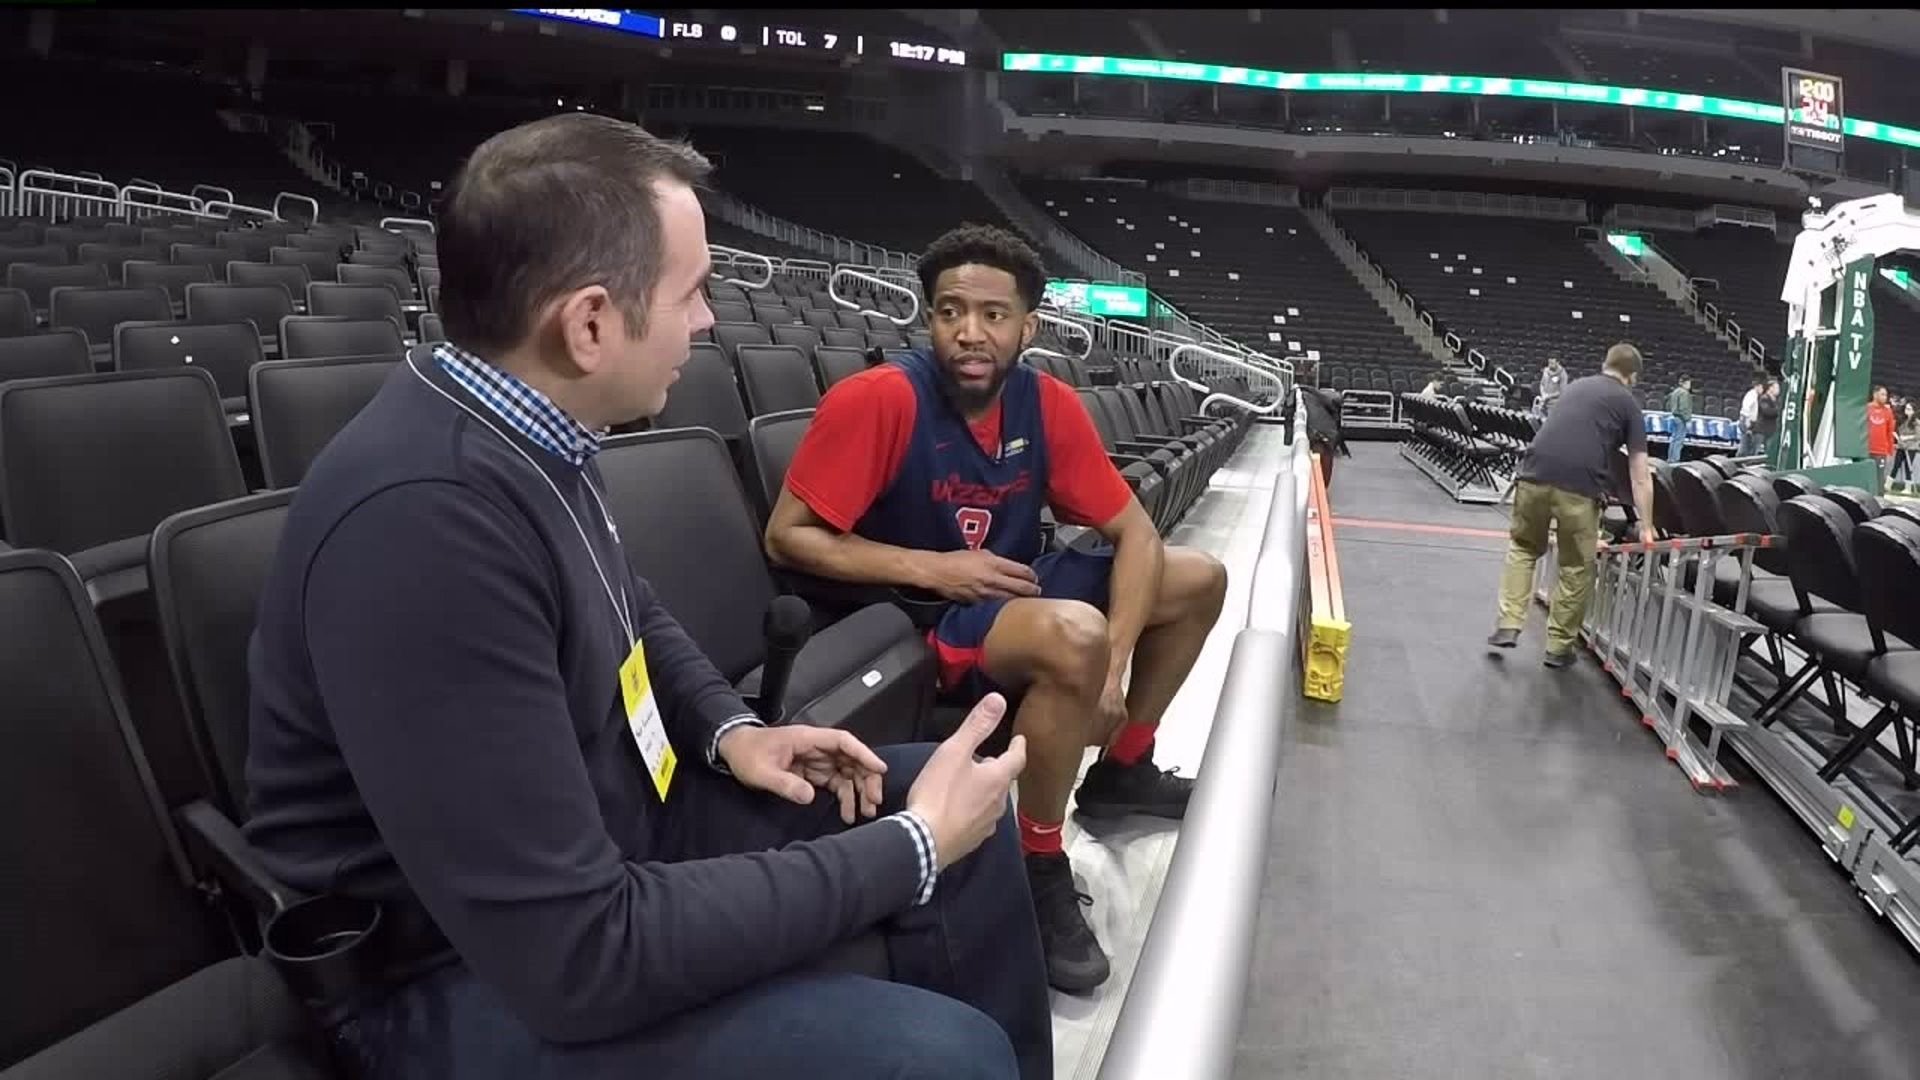 THE SCORE SUNDAY - Chasson Randle Interview